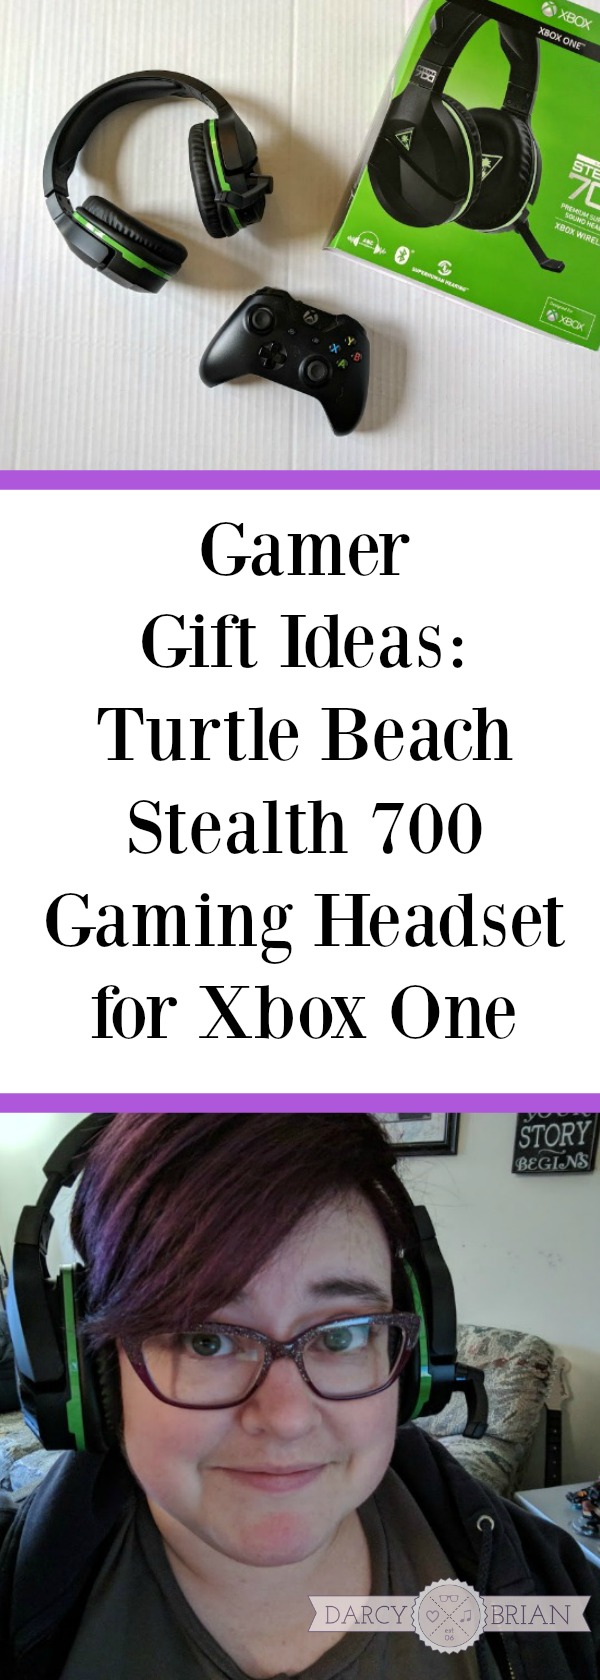 Wondering what to get the gamer on your list? Then we have the perfect gift idea for you! Gamer Gift Ideas: Turtle Beach Stealth 700 Gaming Headset for Xbox One @BestBuy @turtlebeach #ad